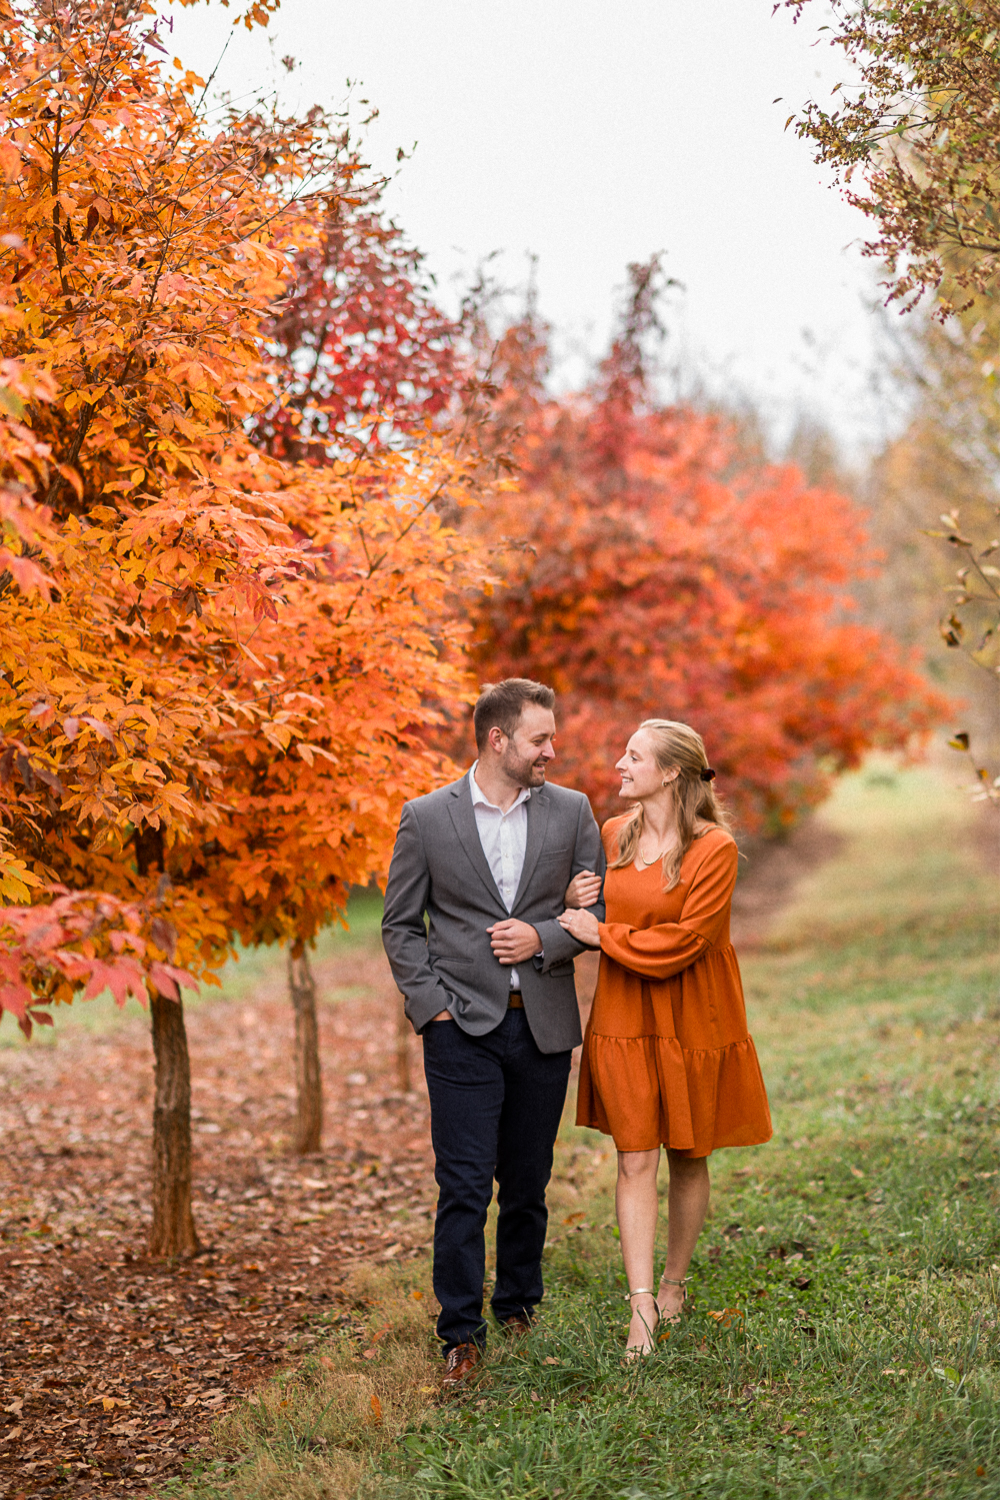 Perfect Engagement Photoshoot Spots in the Charlottesville, VA Area - Hunter and Sarah Photography